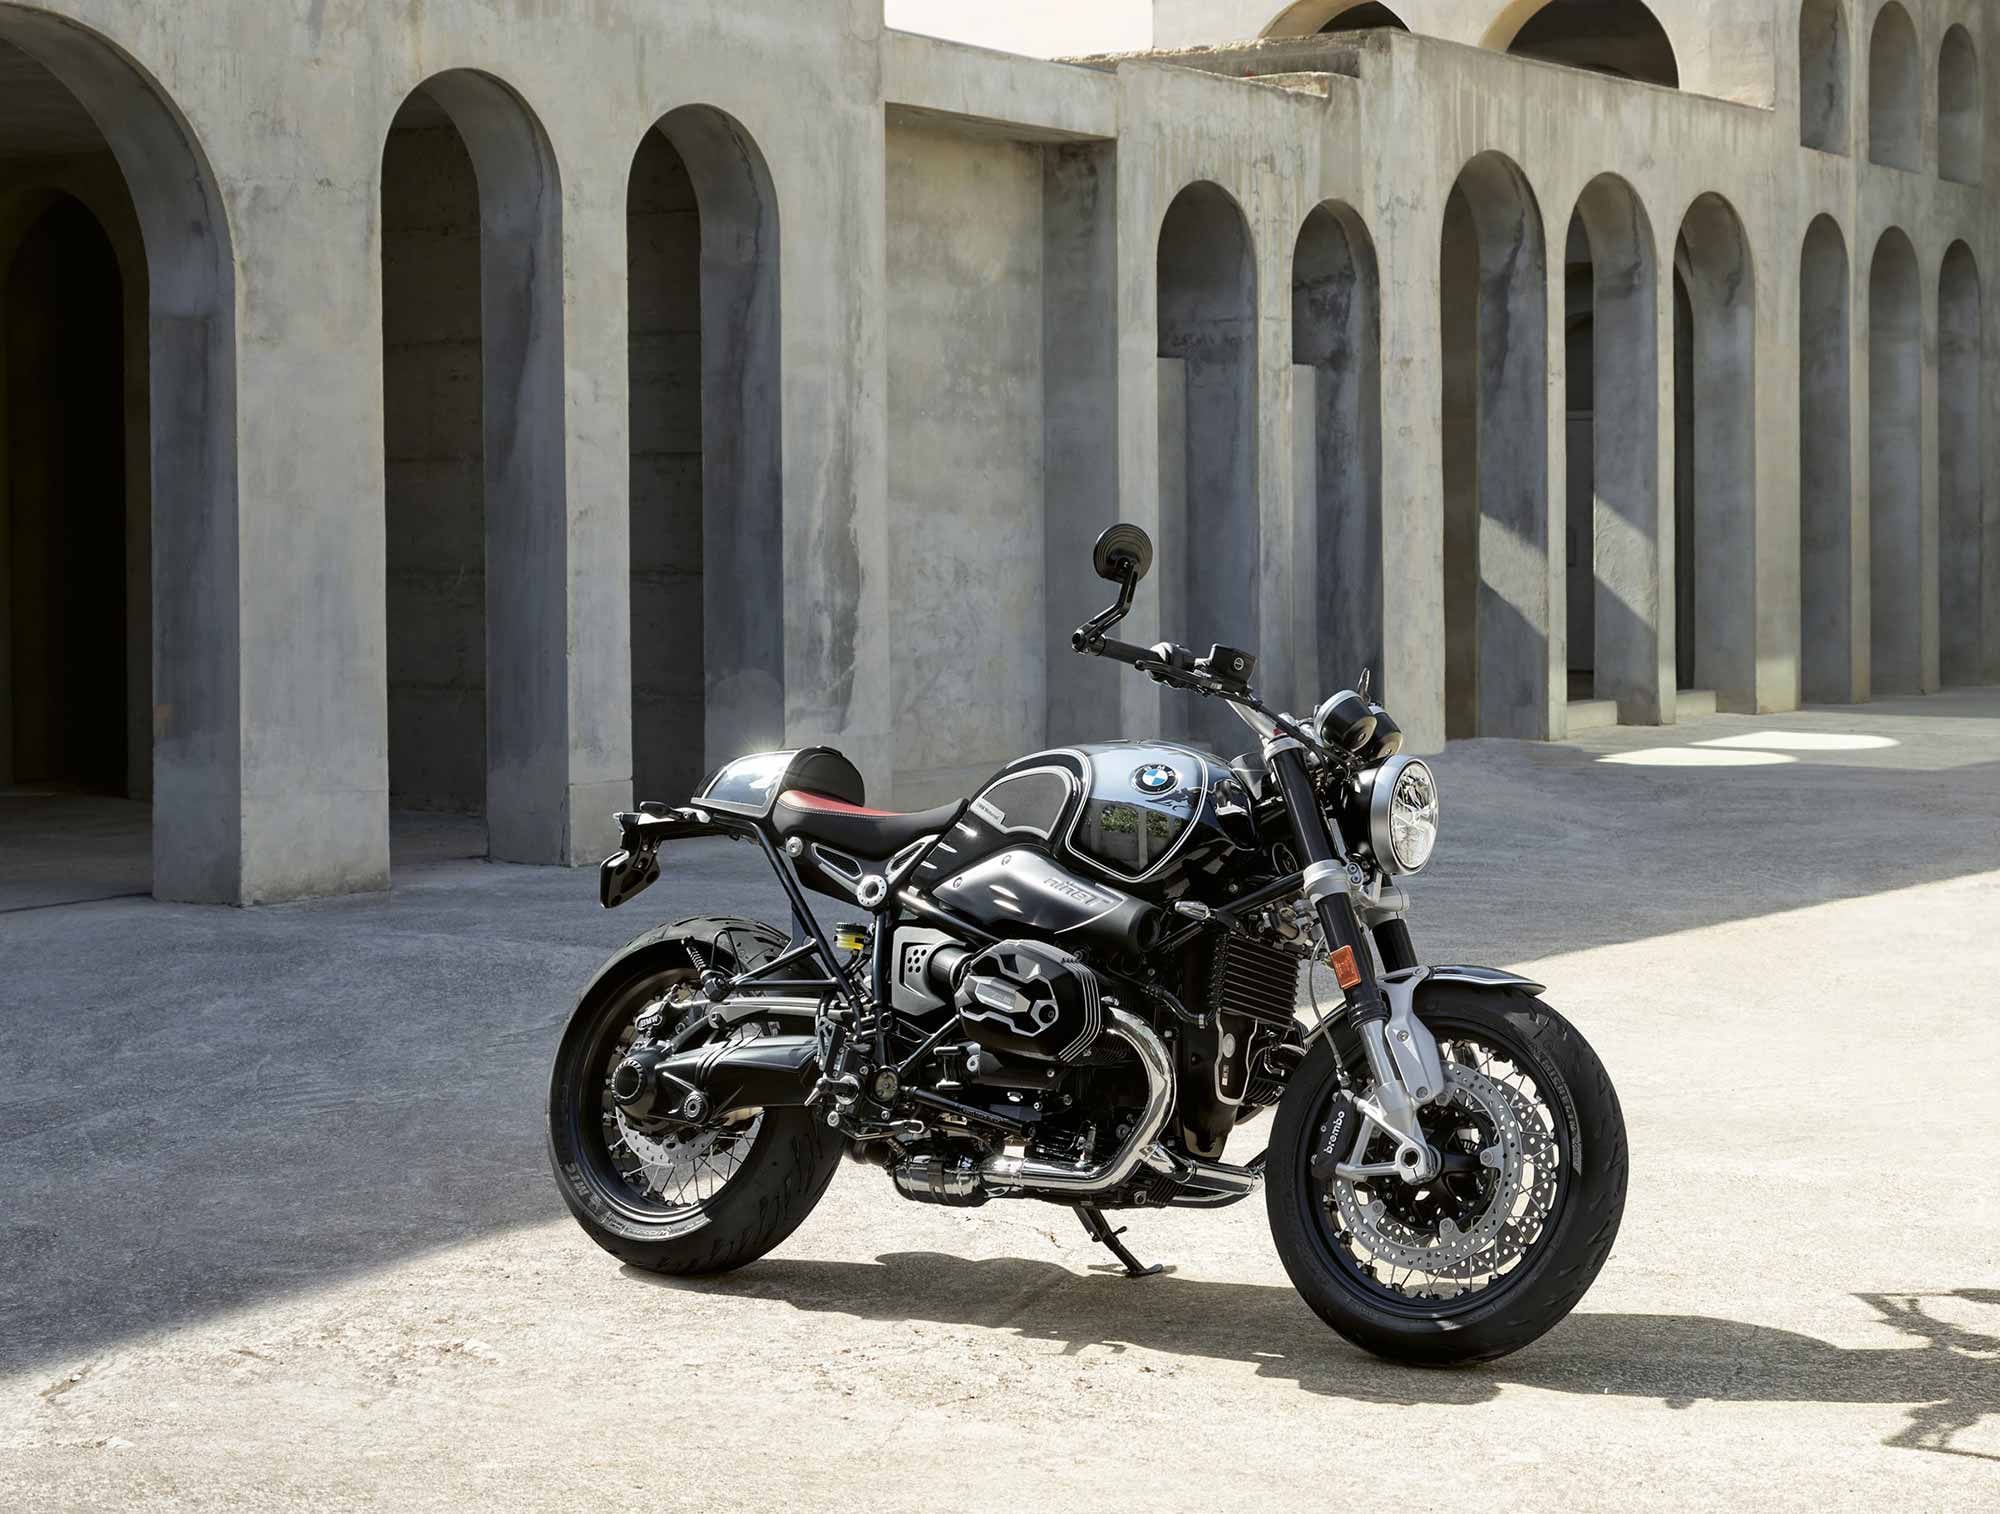 The R nineT 100 Years special edition will be available in limited numbers starting in the early part of 2023.